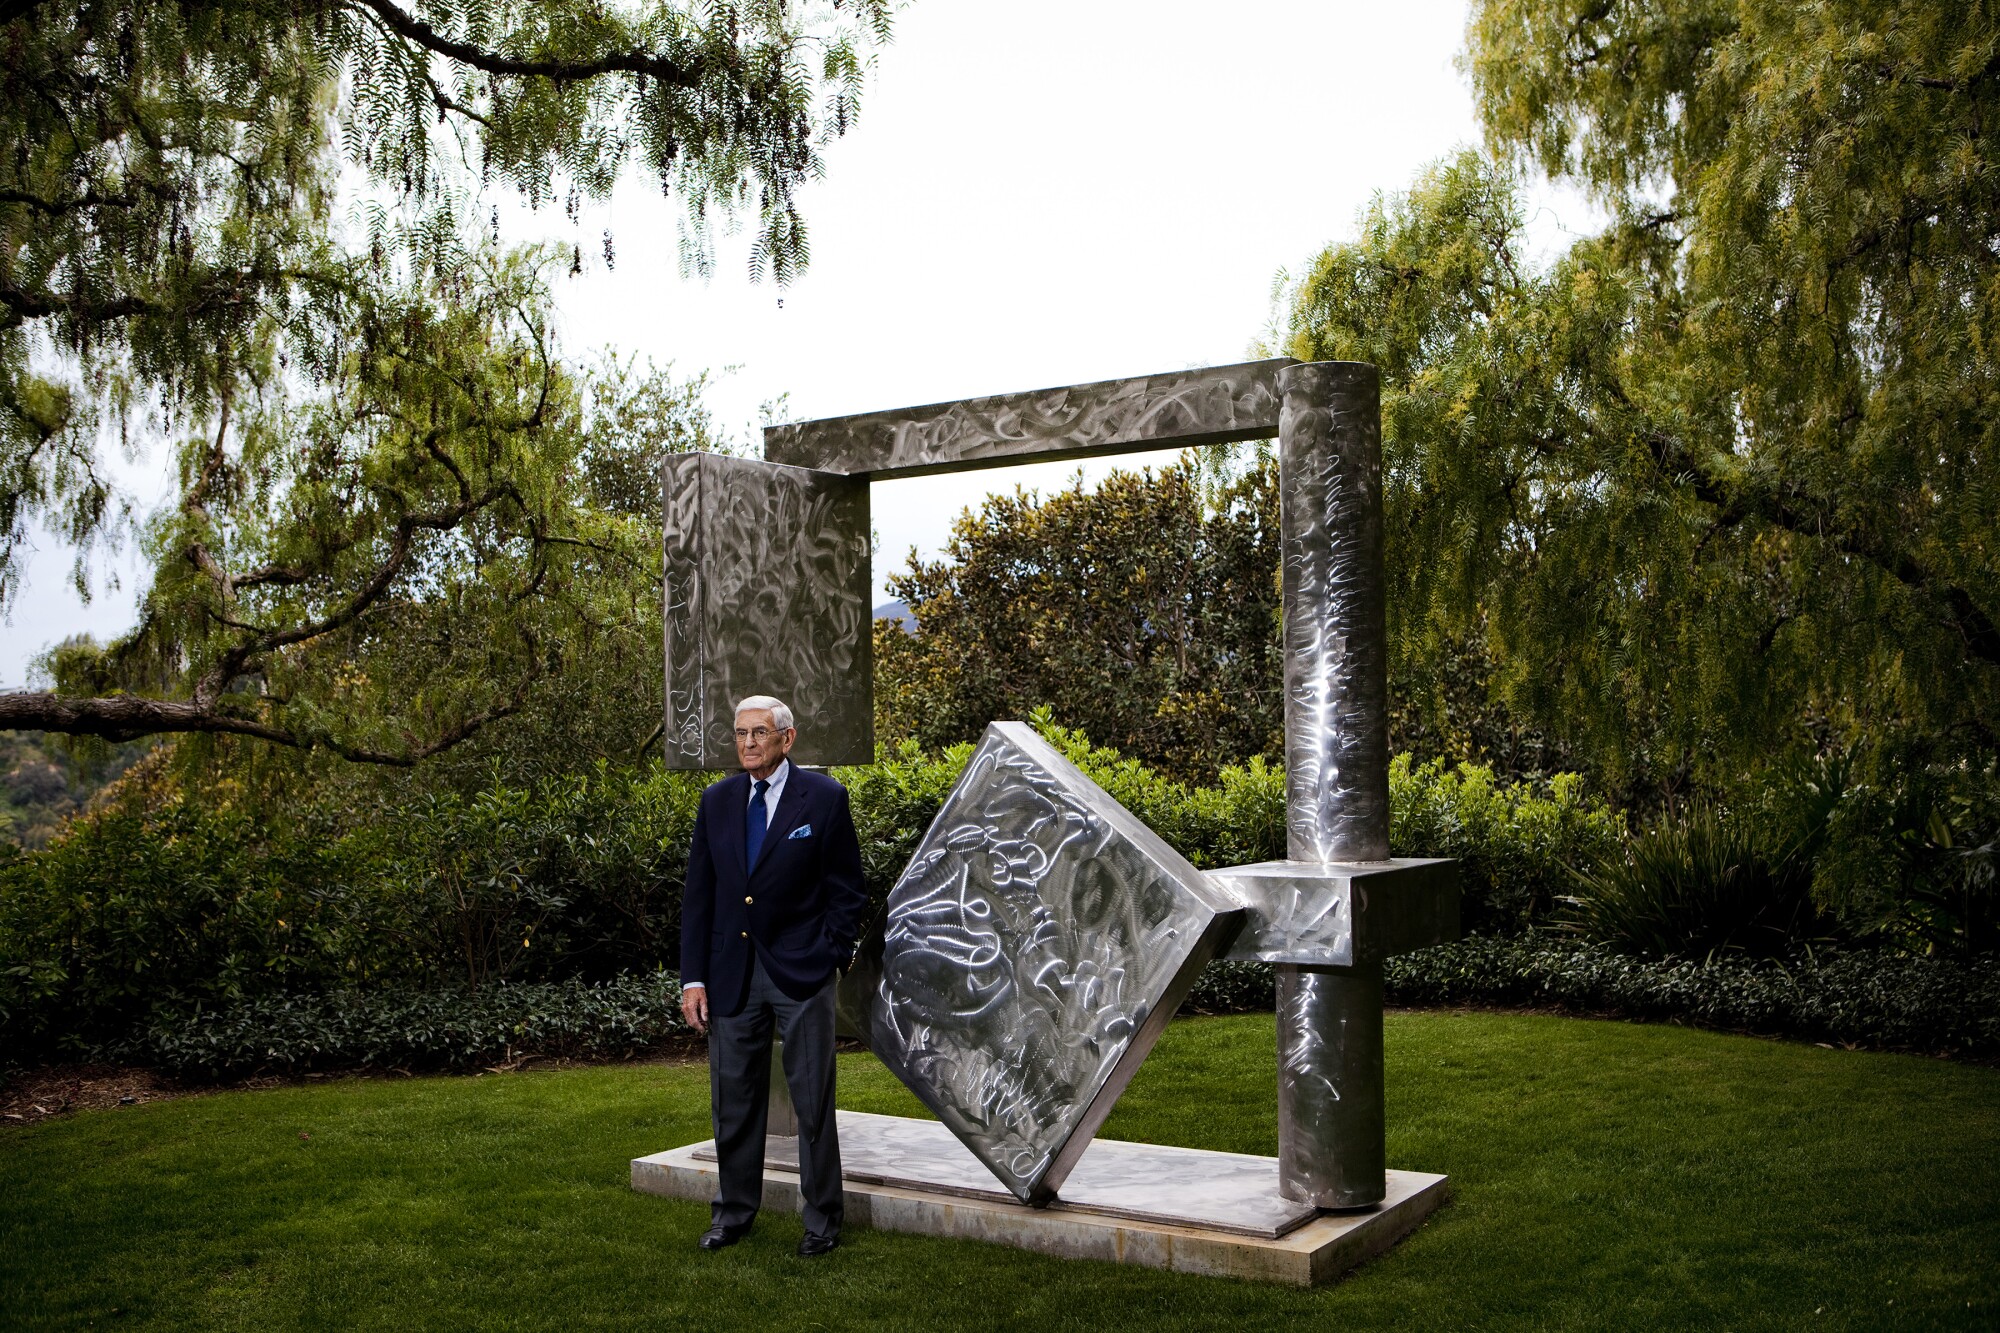 Eli Broad stands in front of a metal sculpture against a backdrop of shrubs and trees.